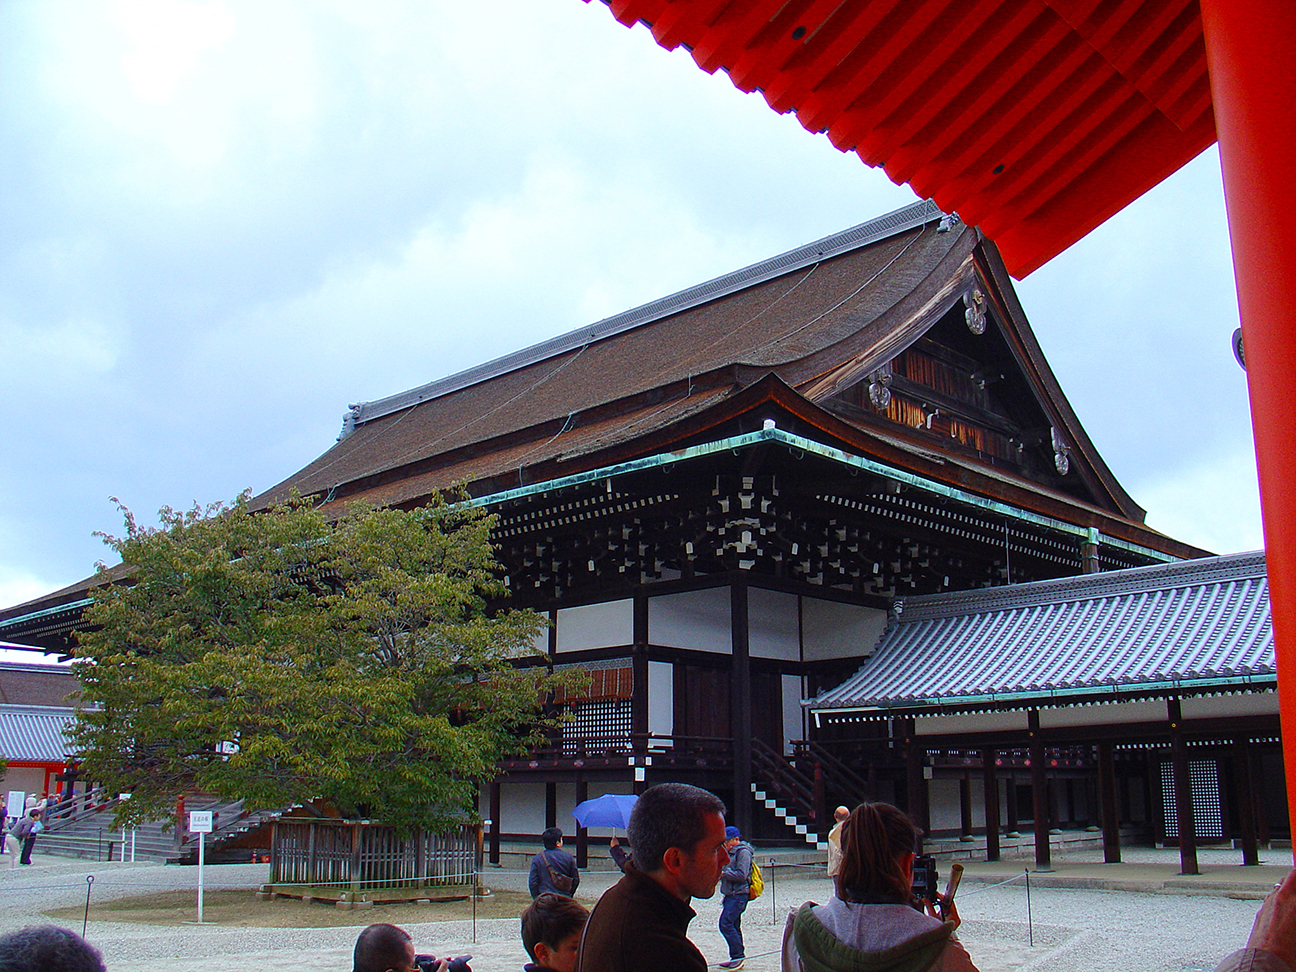 The main Building in the Imperial Palace